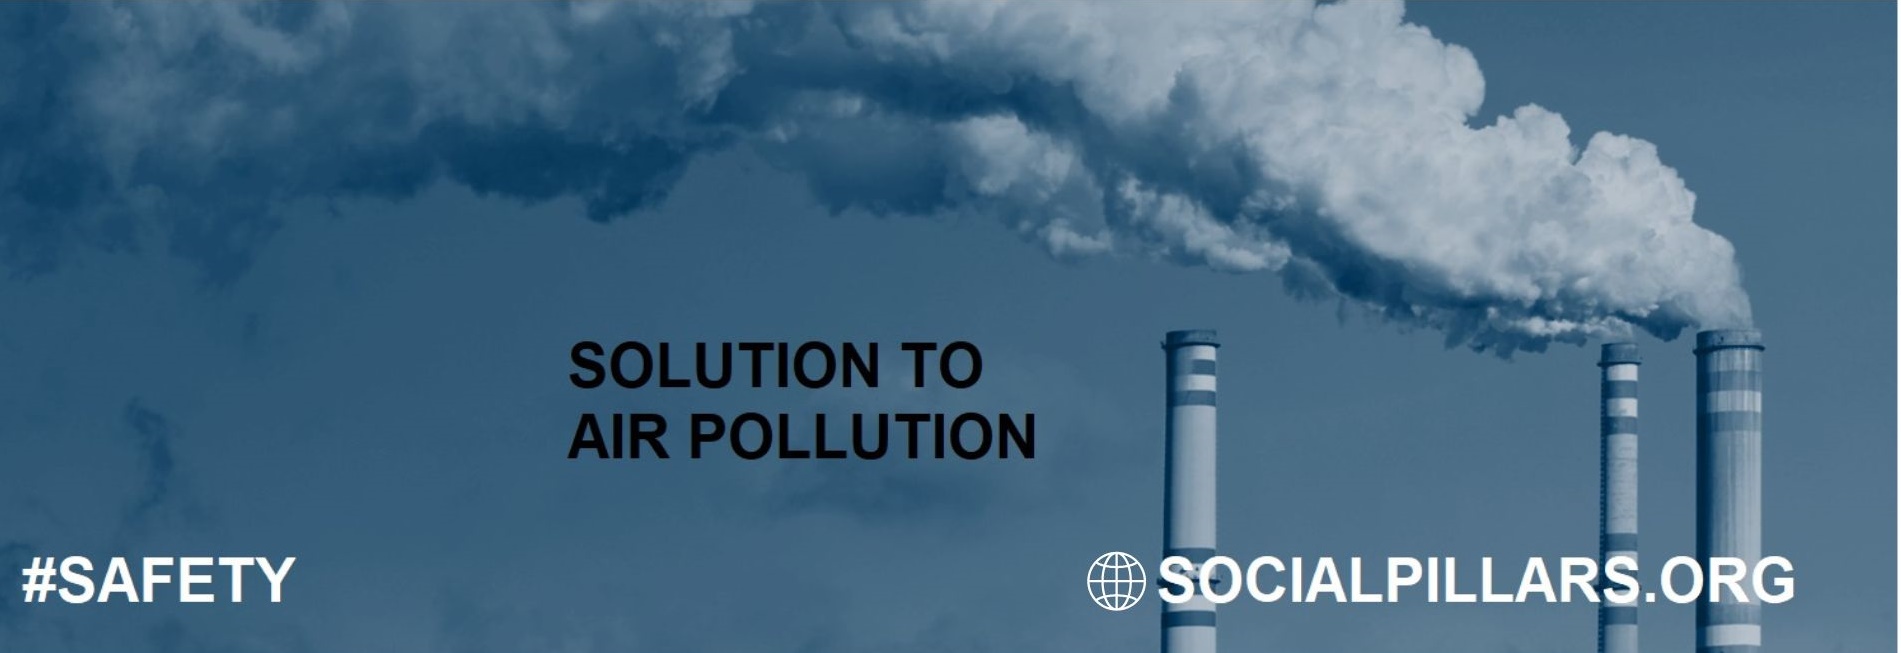 SOLUTION TO AIR POLLUTION